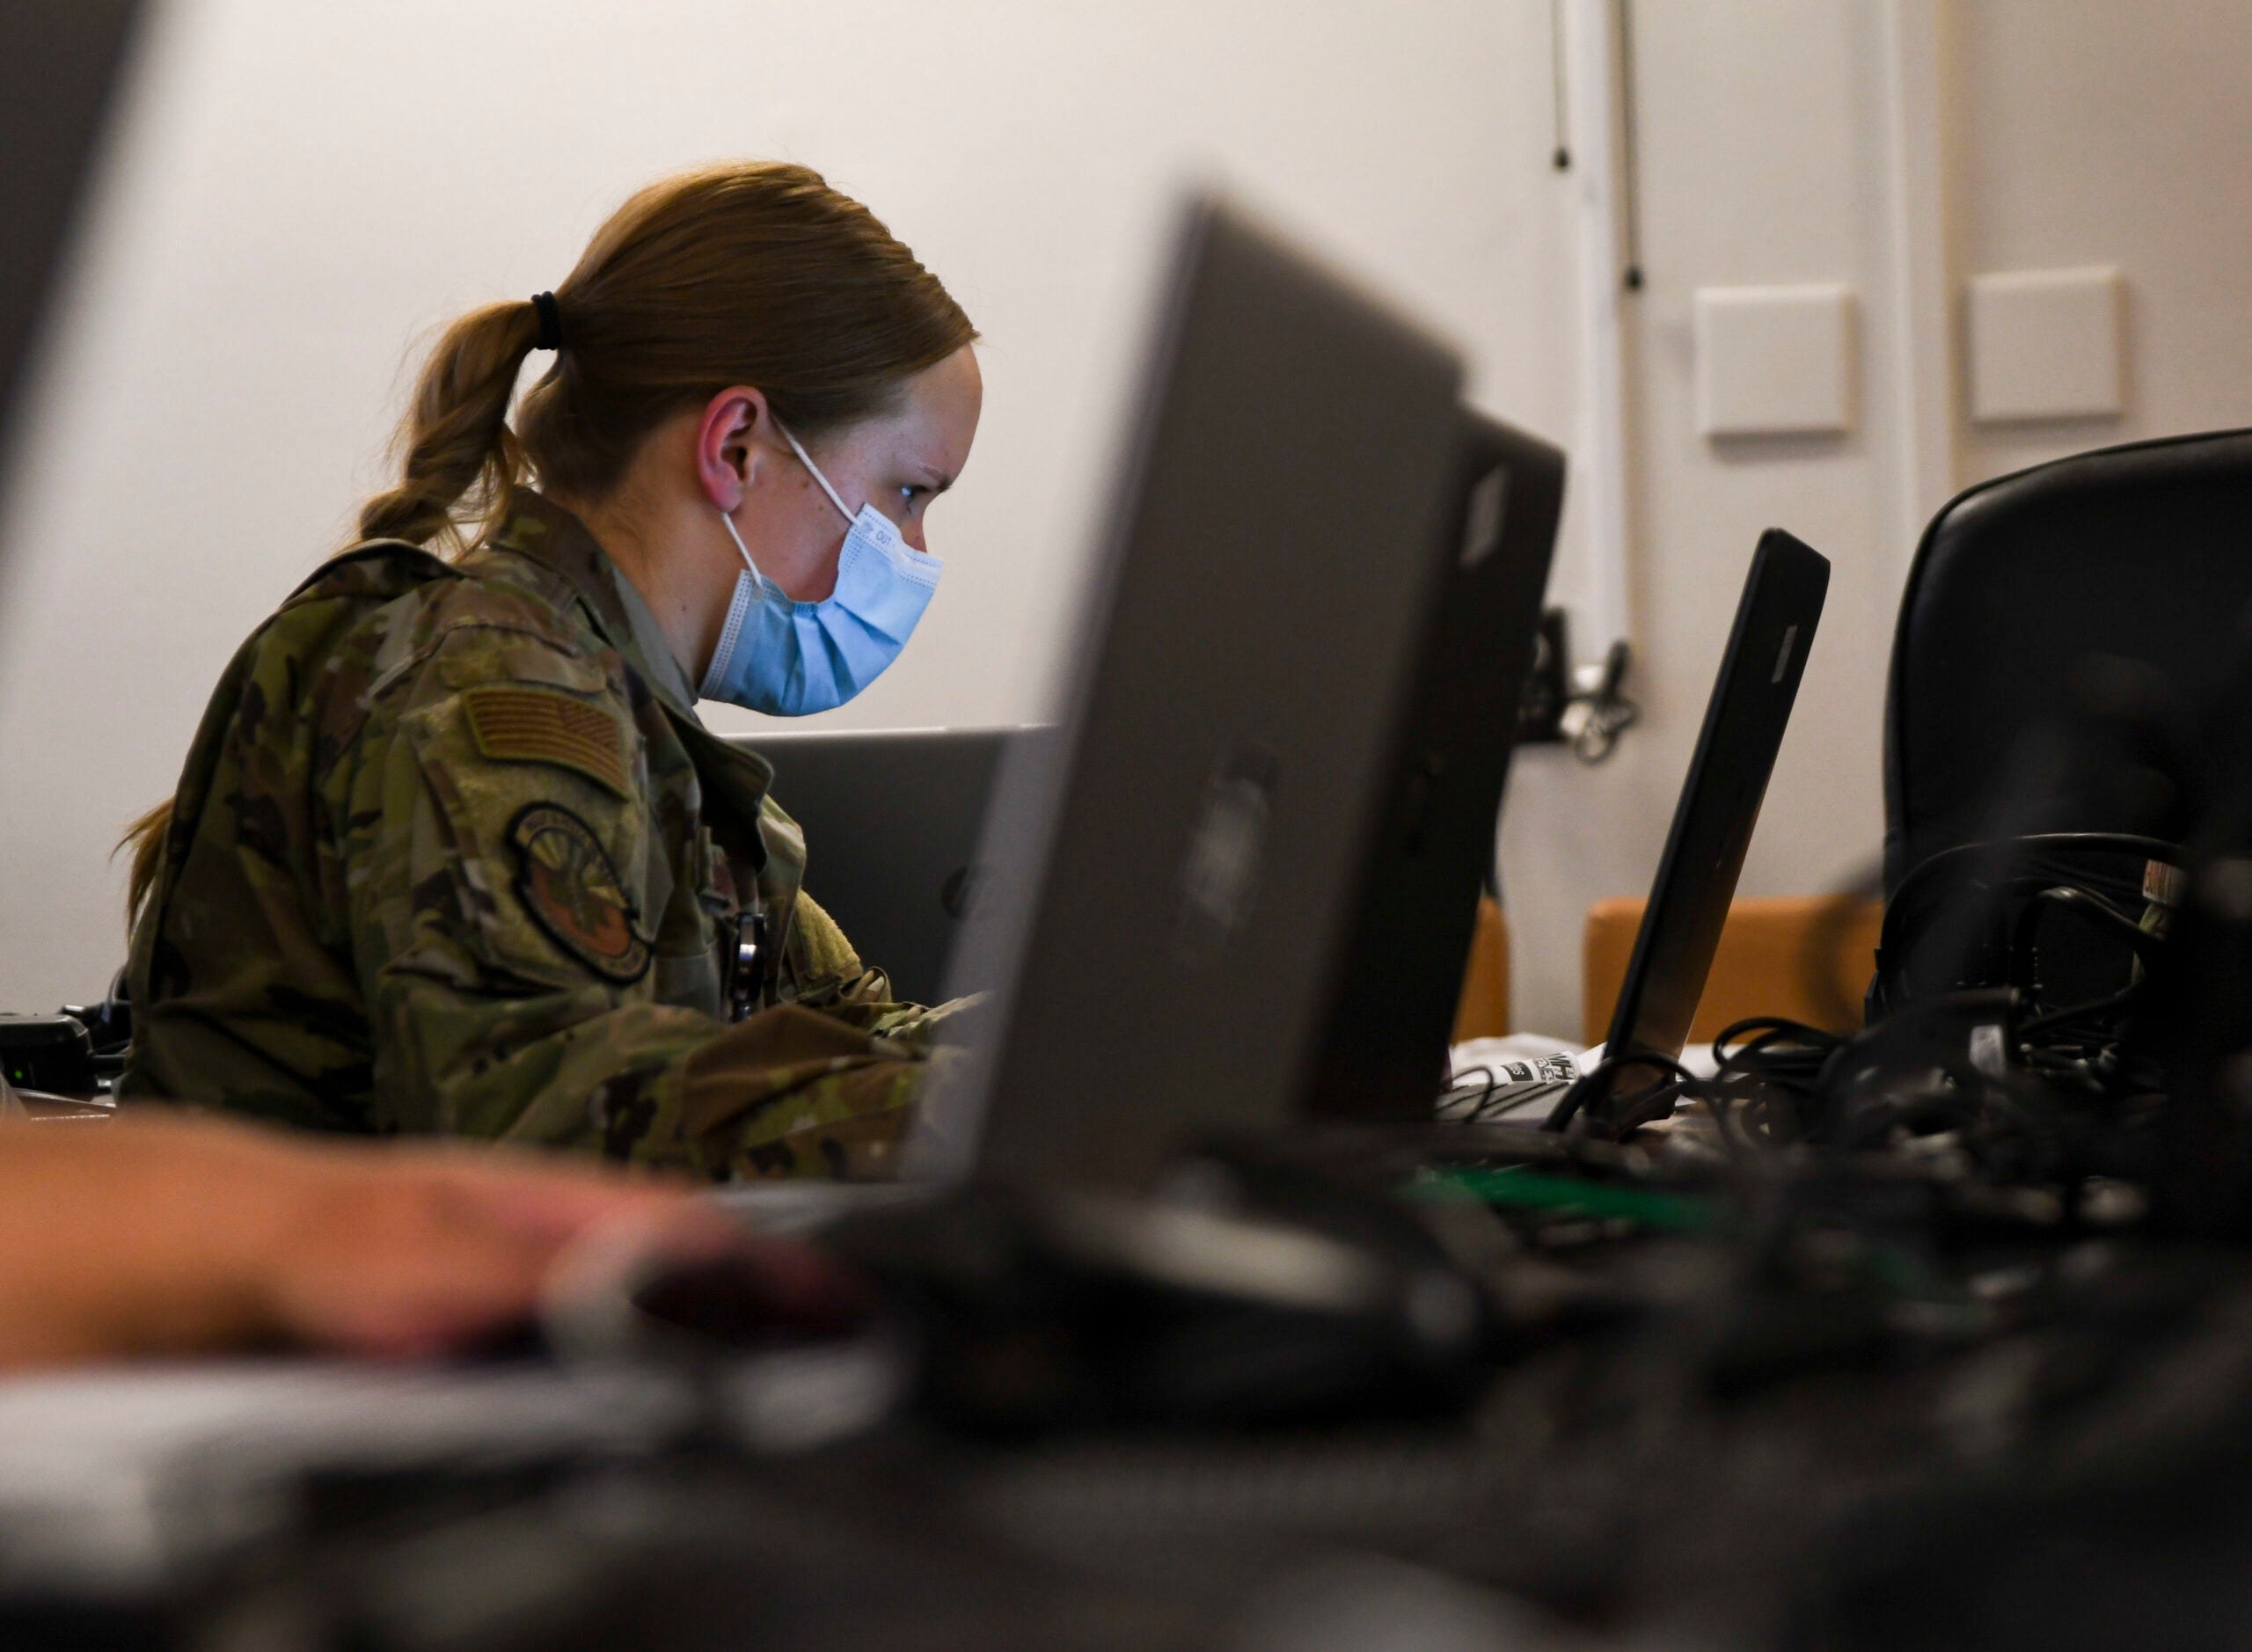 Airman 1st Class Jenna Slaughter, 355th Mental Health technician, works on a task during Military Health System GENESIS training at Davis-Monthan Air Force Base, Arizona, April 7, 2021. The 355th Medical Group is implementing MHS GENESIS in order to enhance its ability to provide healthy combat forces and trusted healthcare to the Desert Lighting Team. (U.S. Air Force photo by Senior Airman Blake Gonzales)